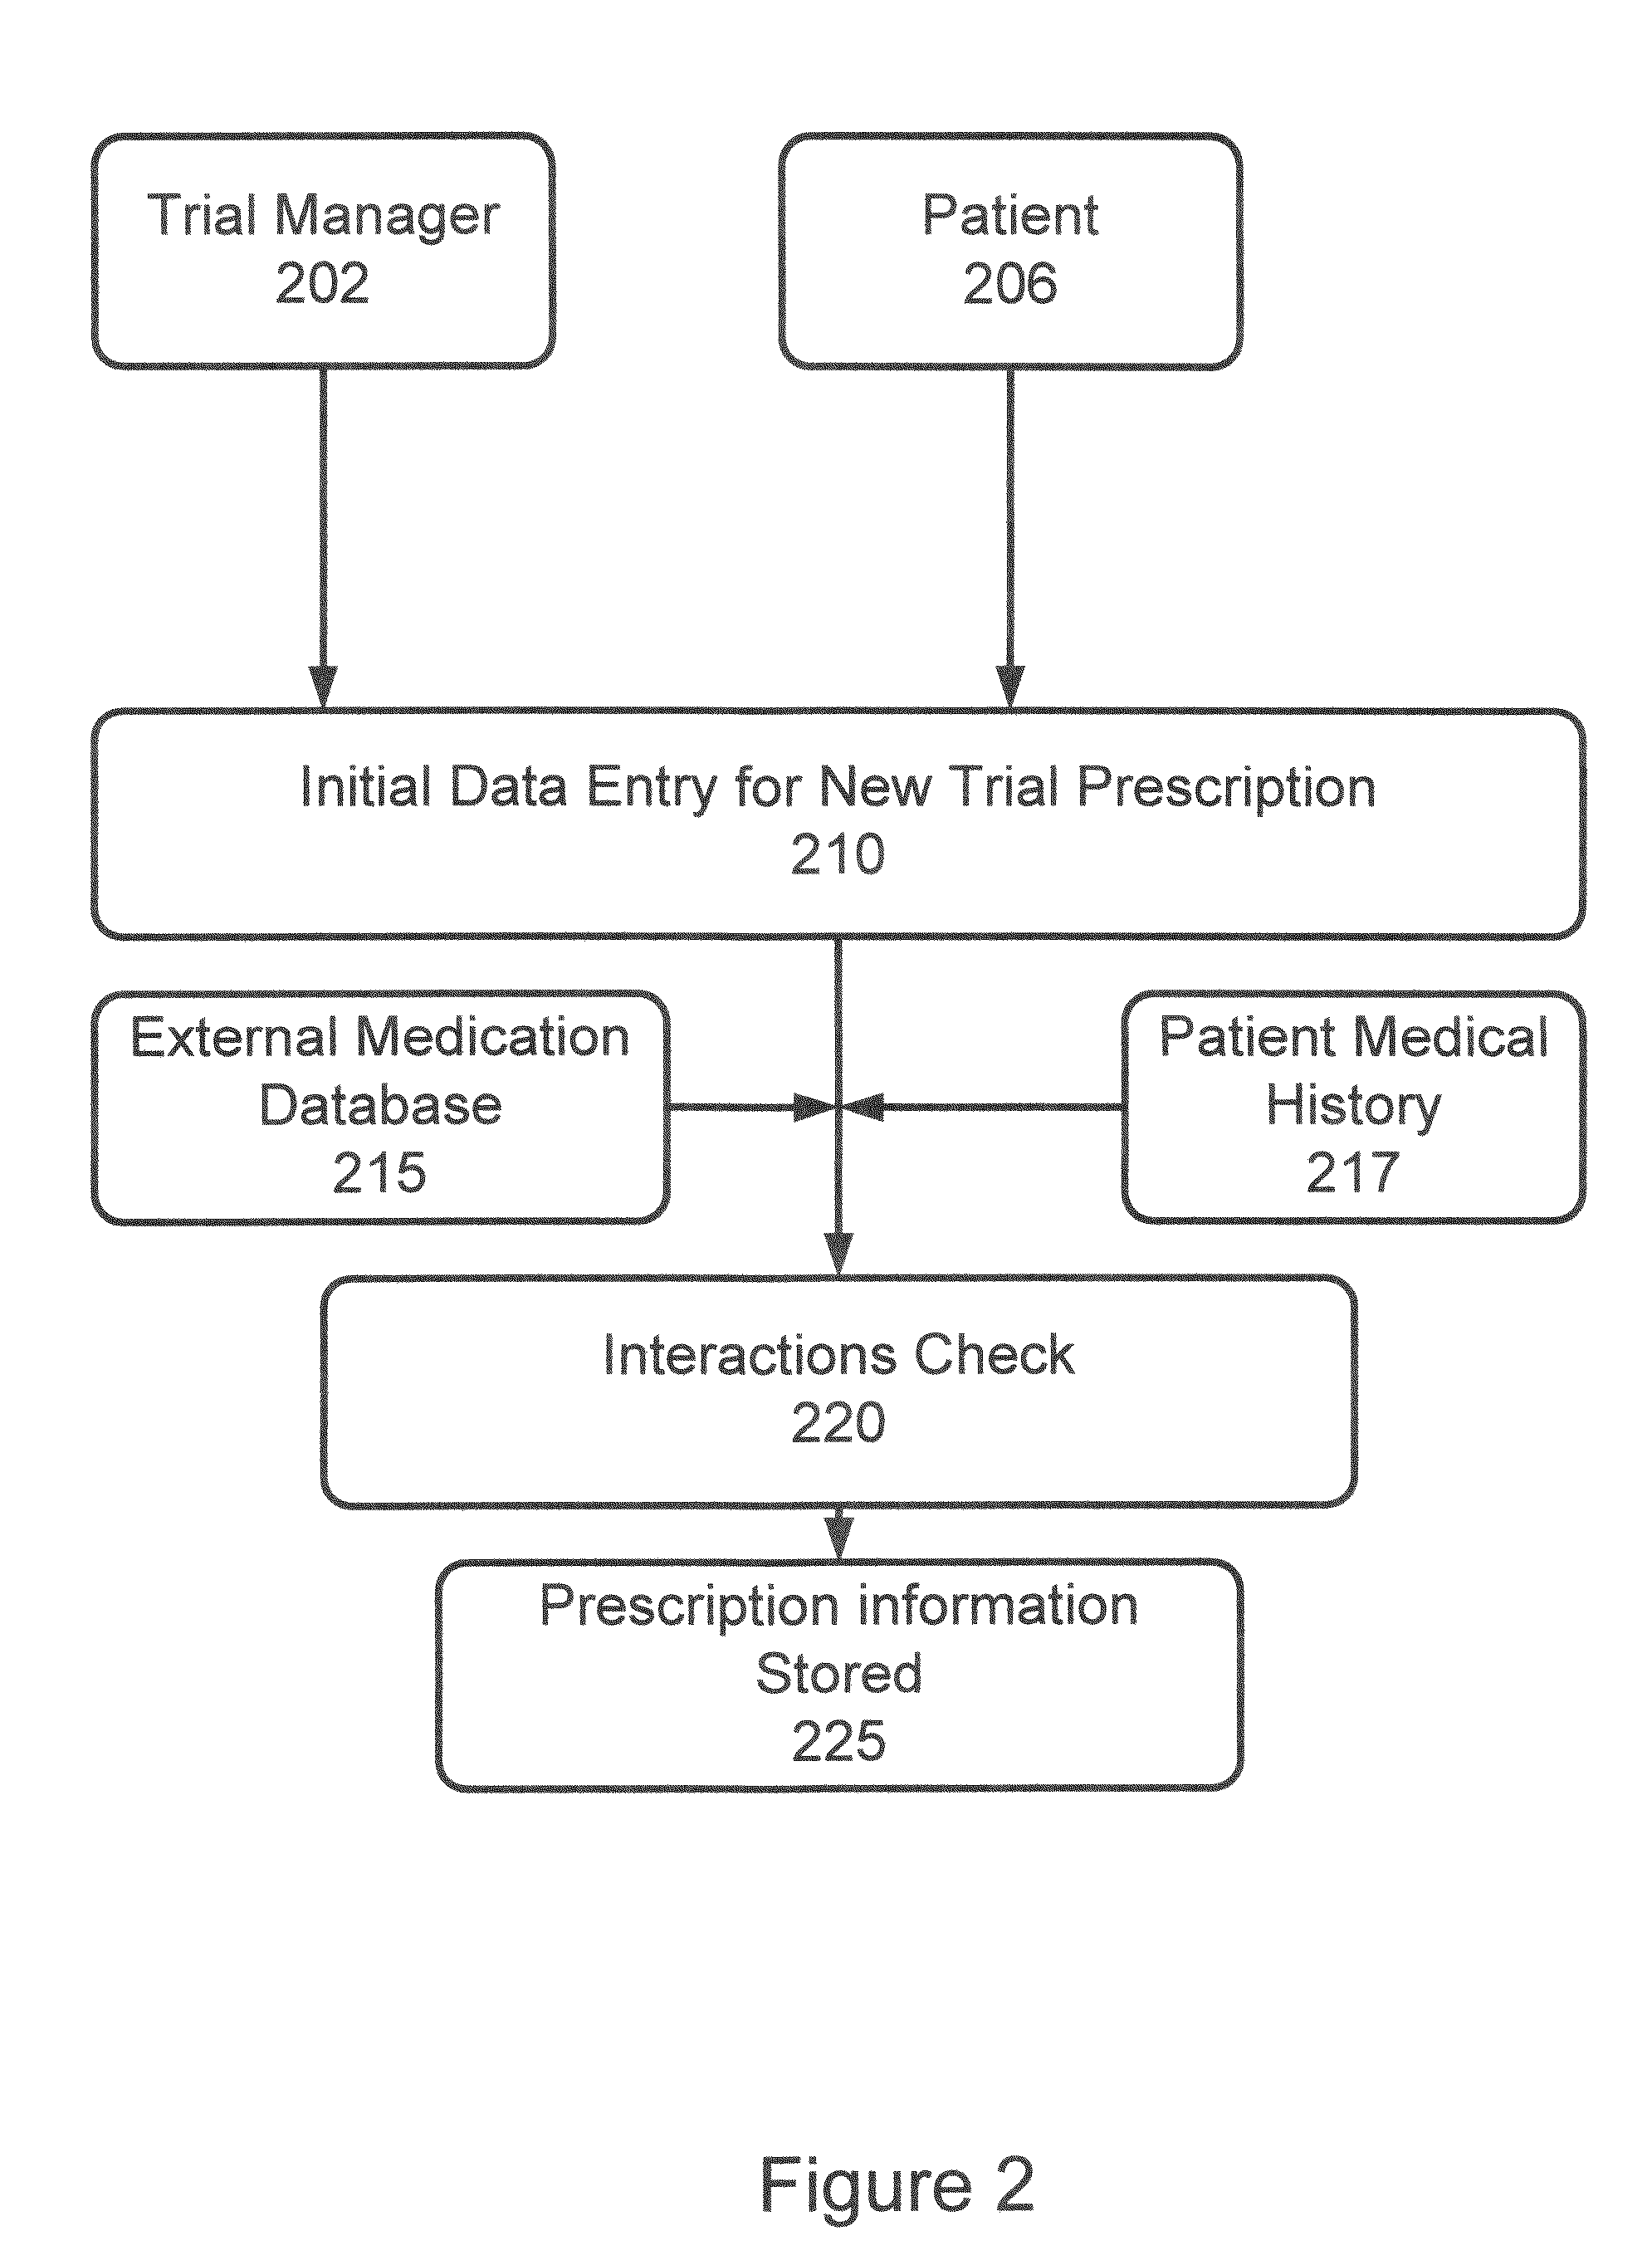 Method and Apparatus for Verification of Clinical Trial Adherence